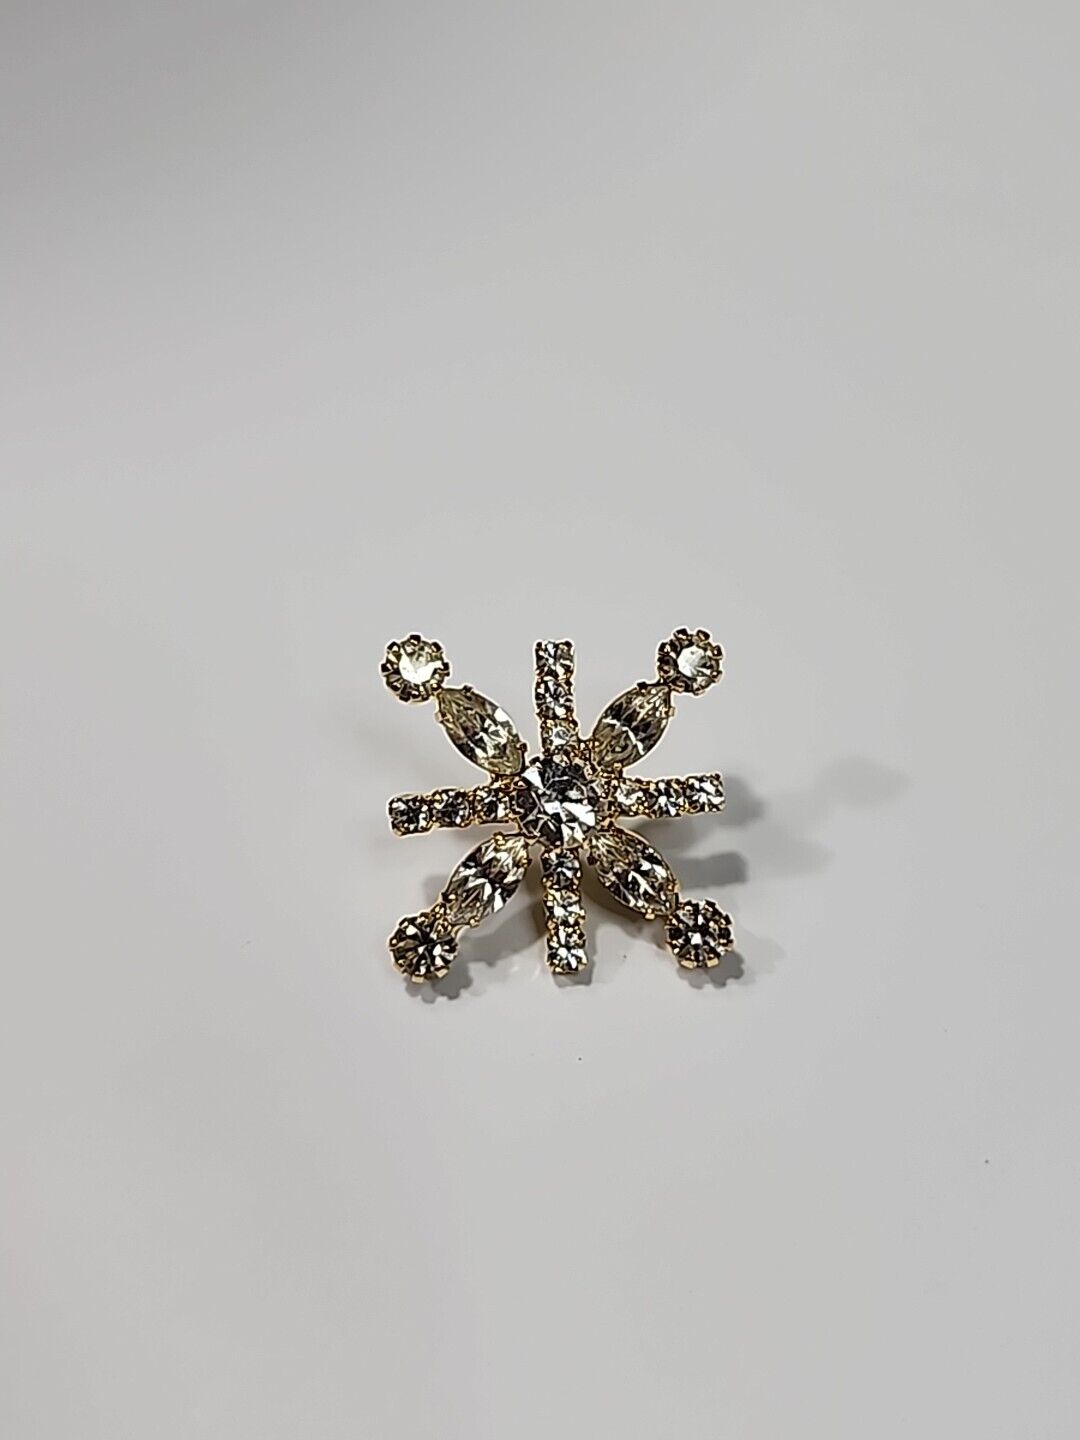 Snowflake Brooch Pin Clear Faceted Faux Gems in Gold Color Setting Sparkly